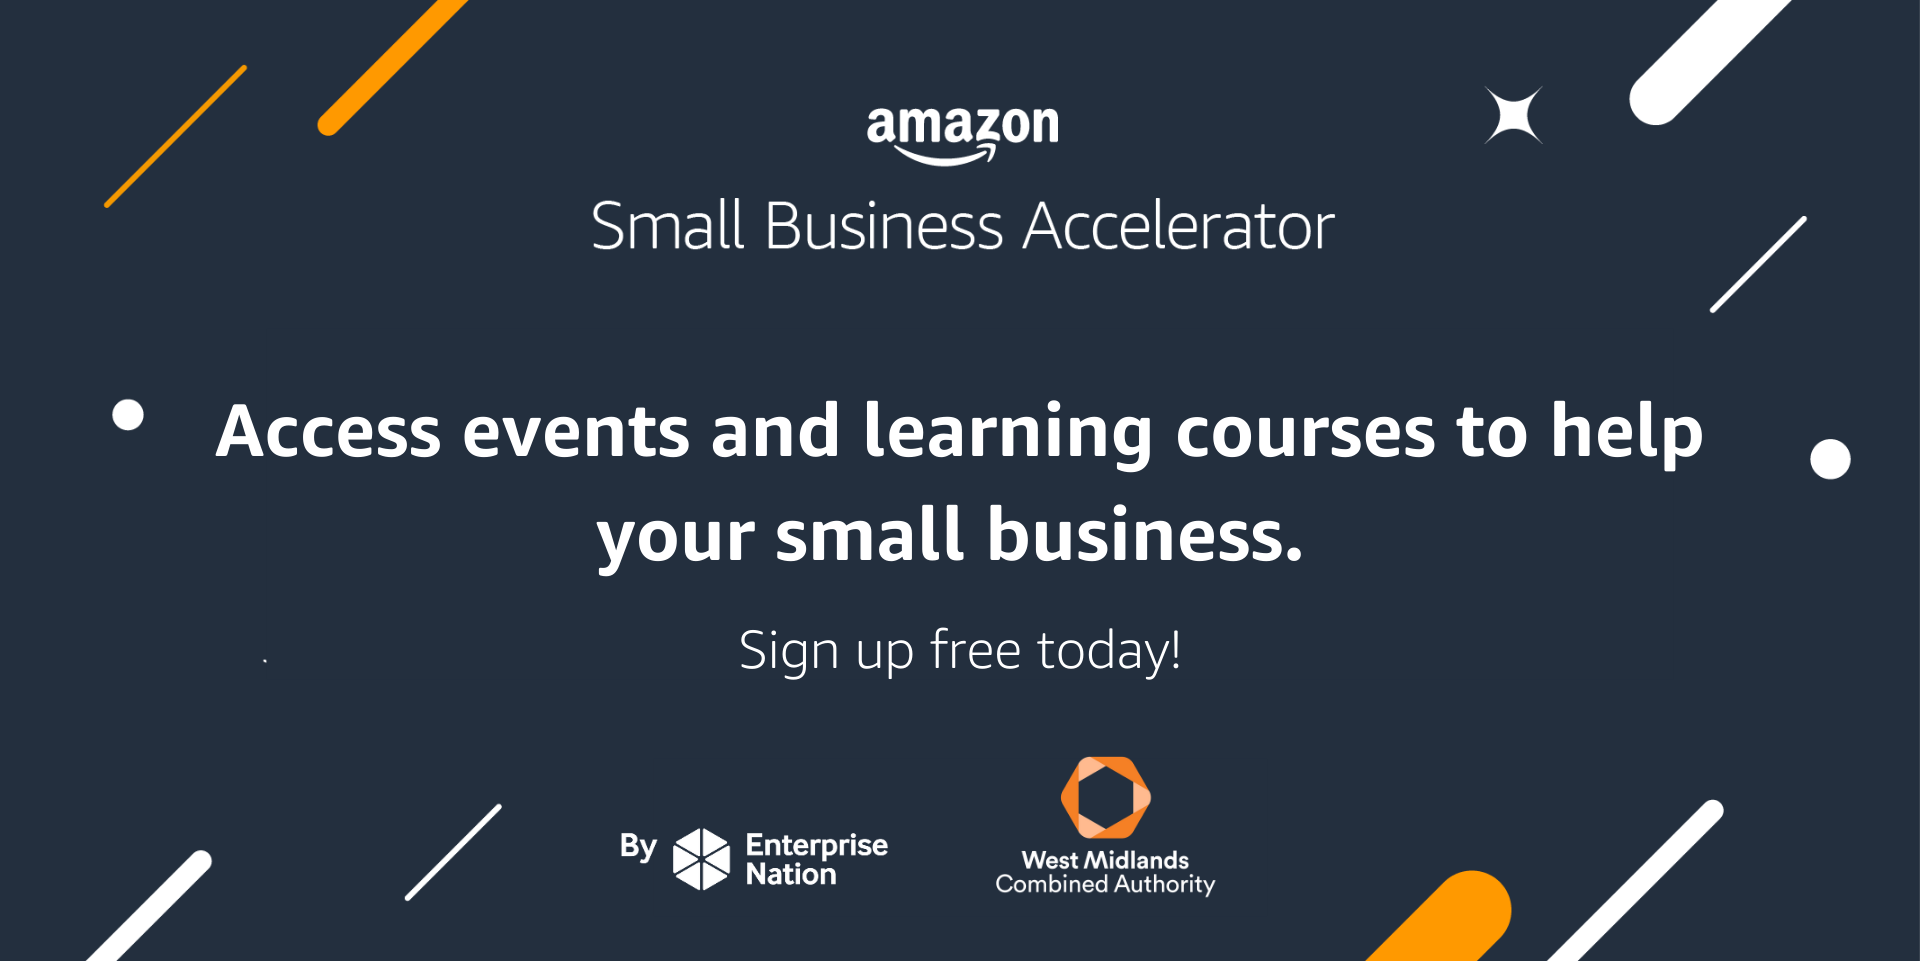 Free expert advice from Amazon to help start and grow a business online